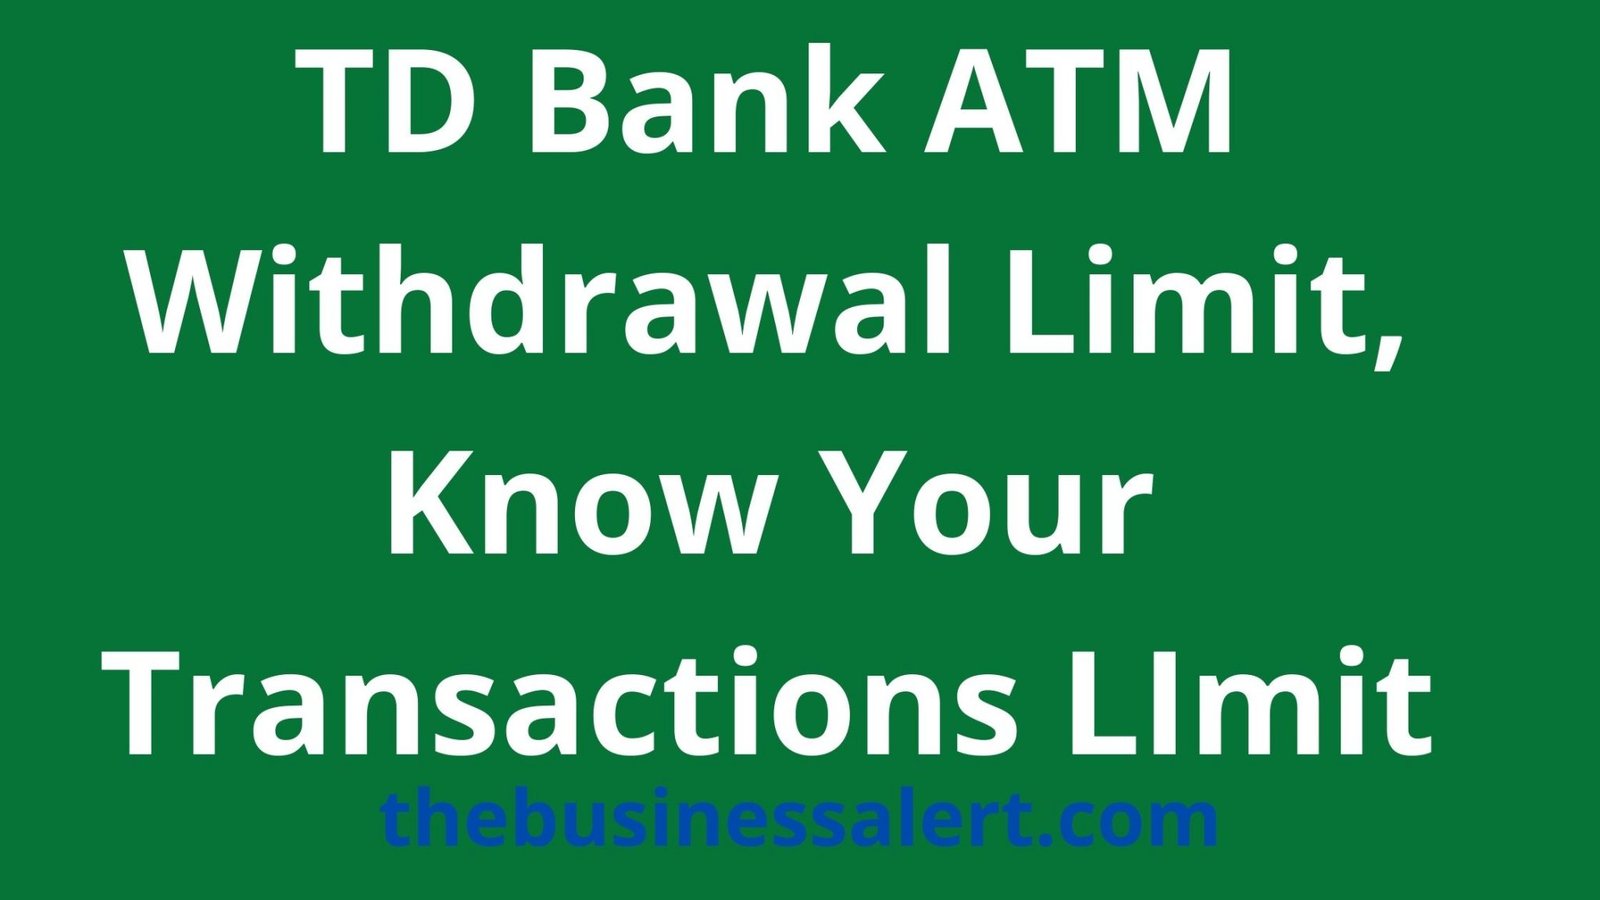 Td Bank Atm Withdrawal Limit Know Your Transactions Limit The Business Alert 4289